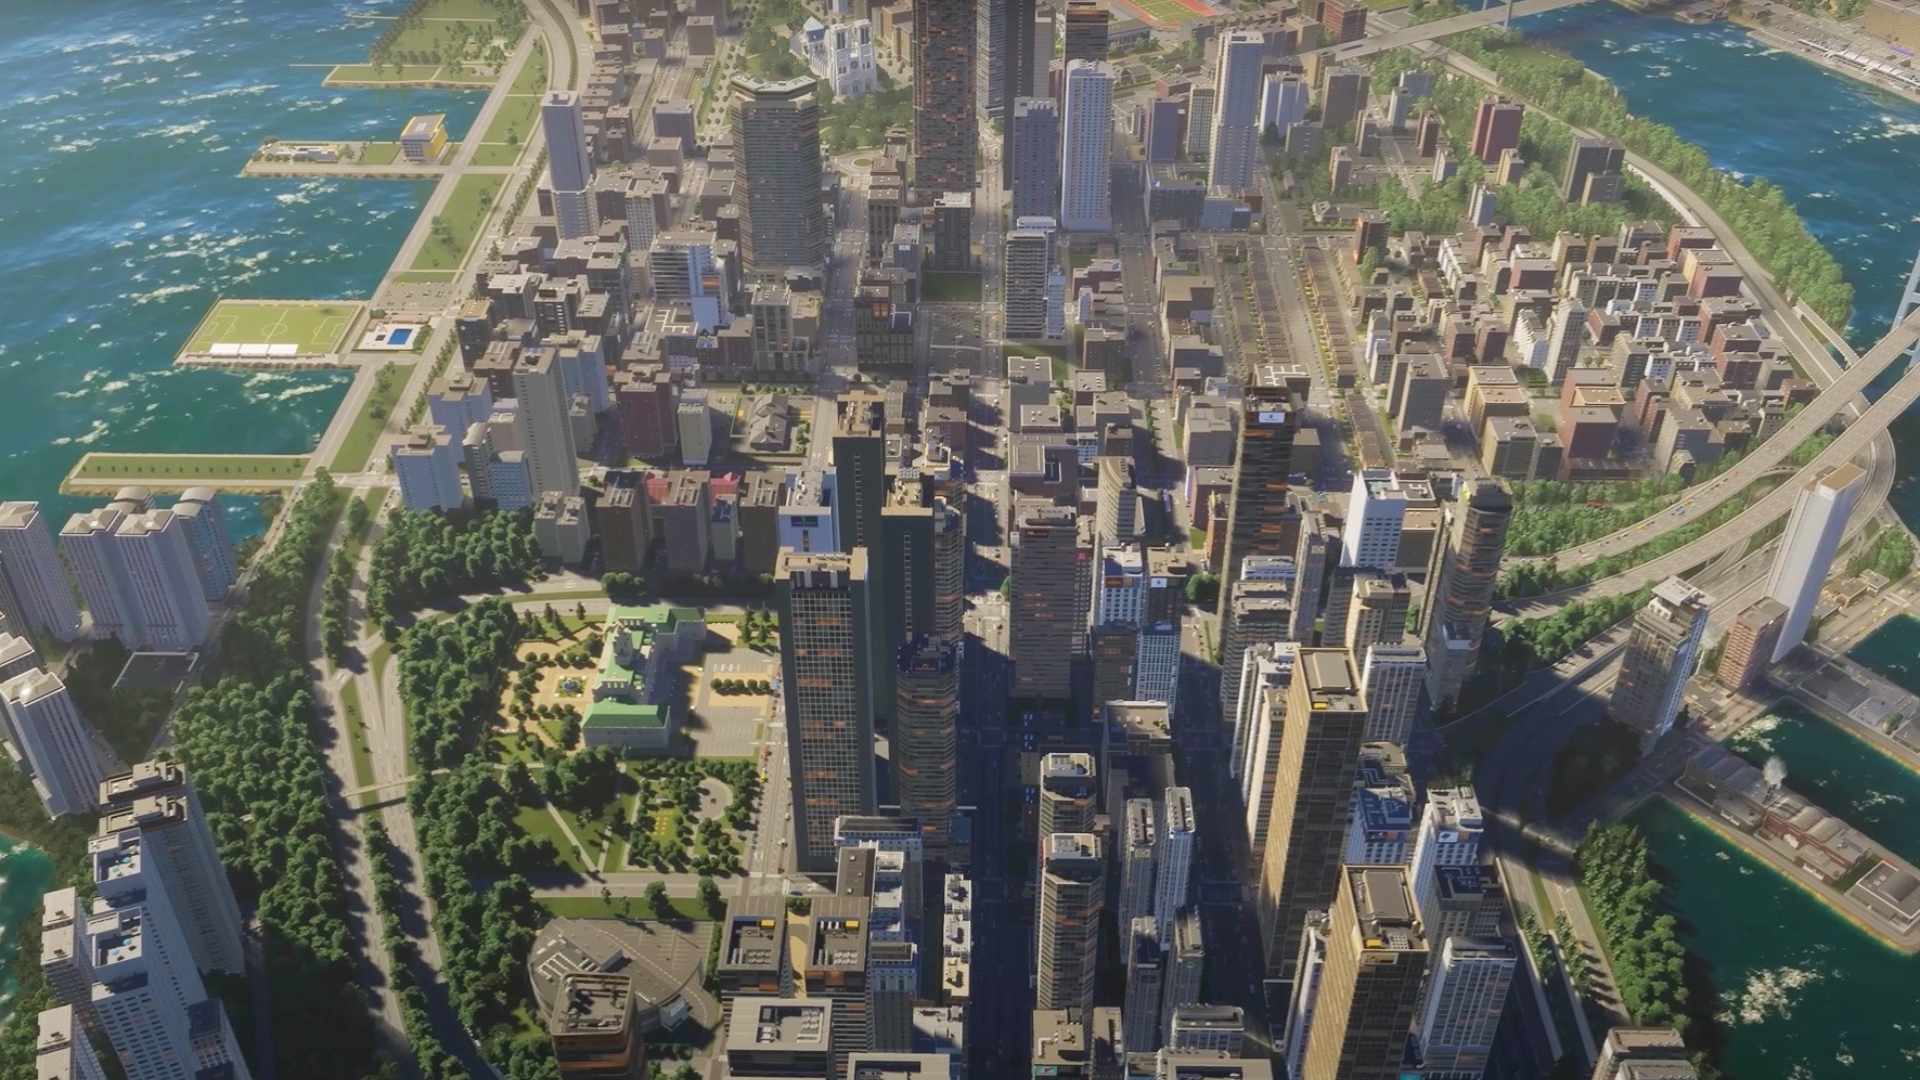 Cities Skylines 2 is so realistic it's actually making me scared